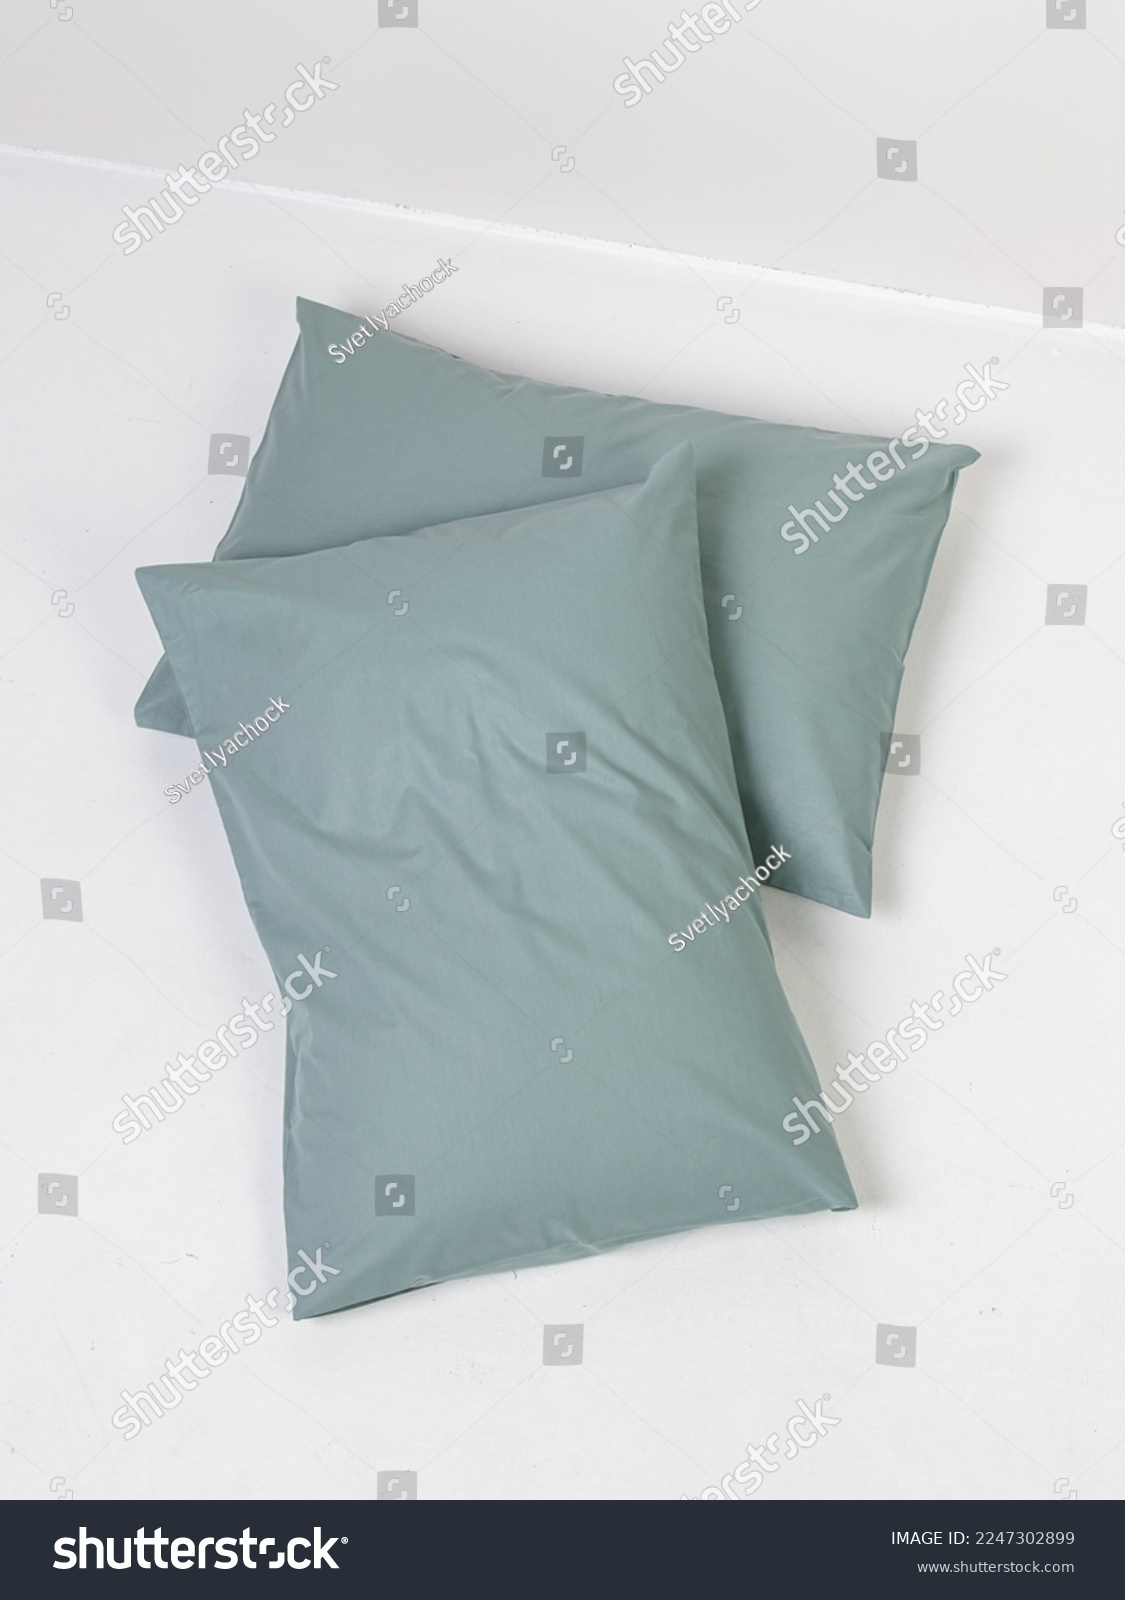 Two pillows in green pillowcases on white background #2247302899